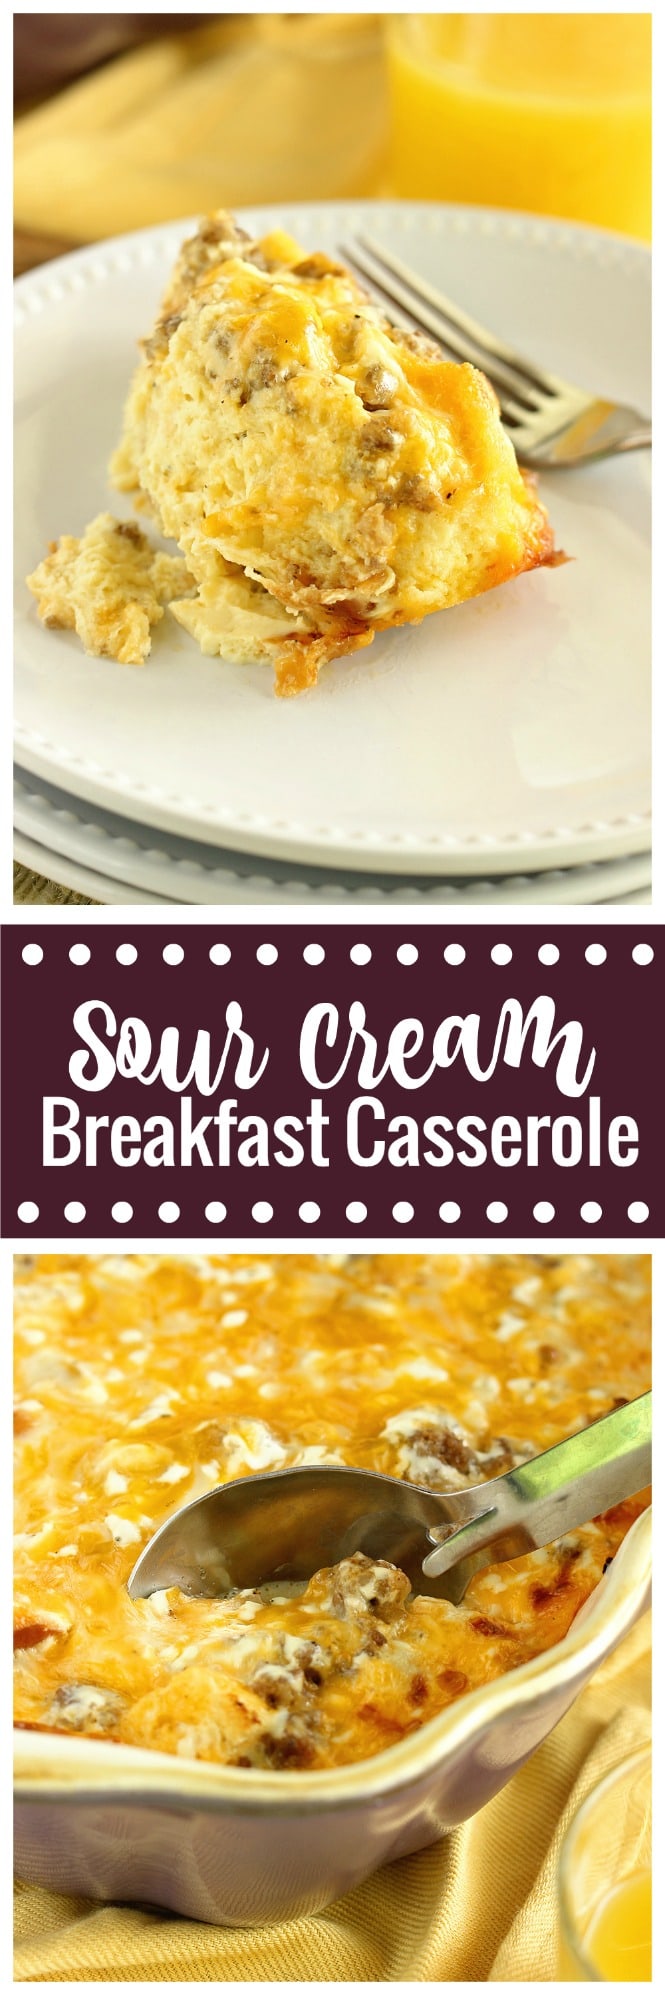 This Sour Cream Breakfast Casserole is one of the BEST yet! It is filled with layers of challah bread, breakfast sausage, eggs, sour cream, and cheese, and it is a perfect make-ahead idea!